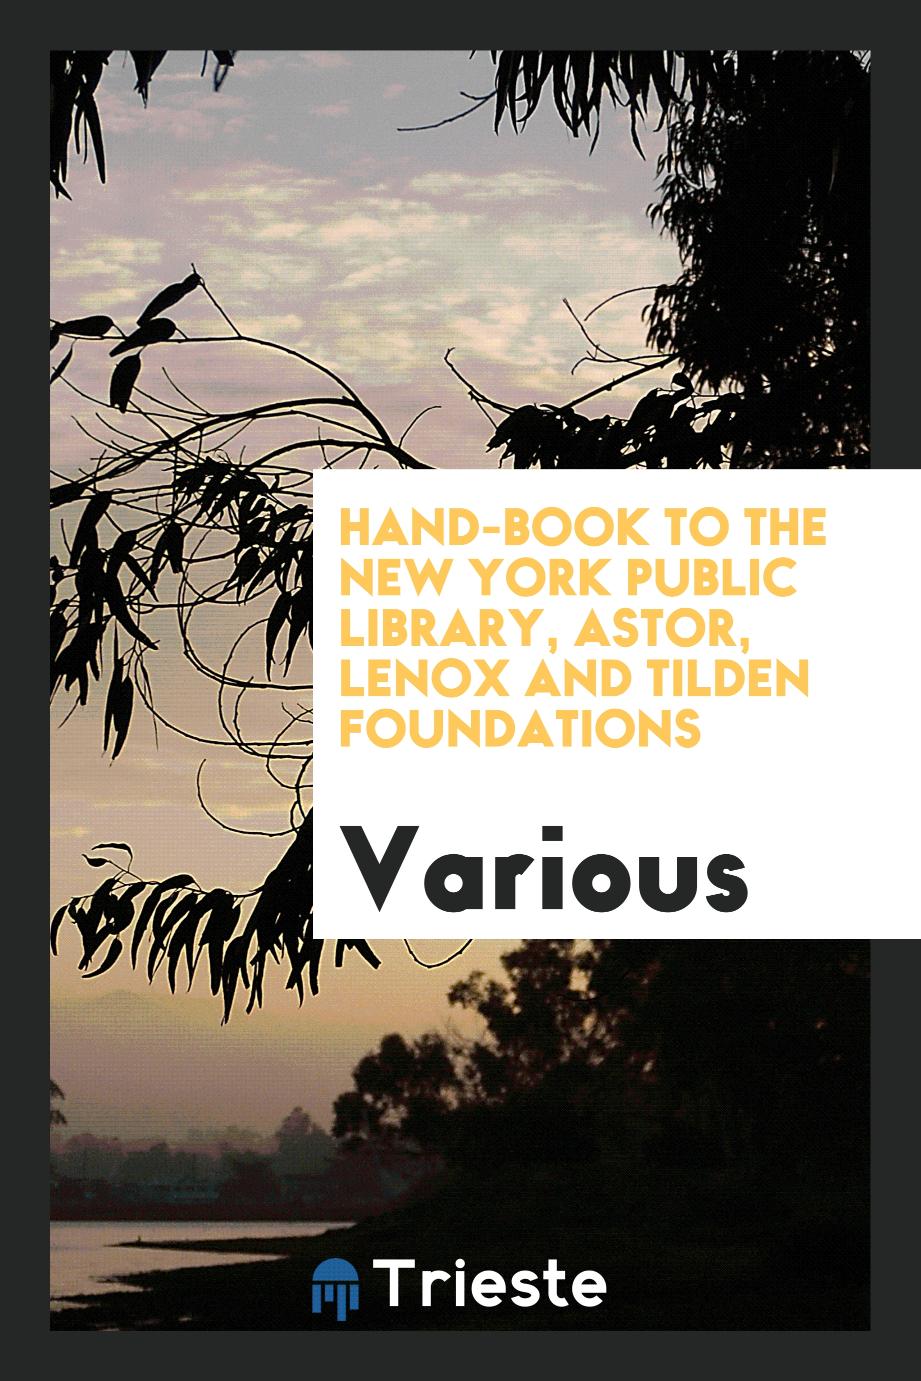 Hand-book to the New York Public Library, Astor, Lenox and Tilden Foundations